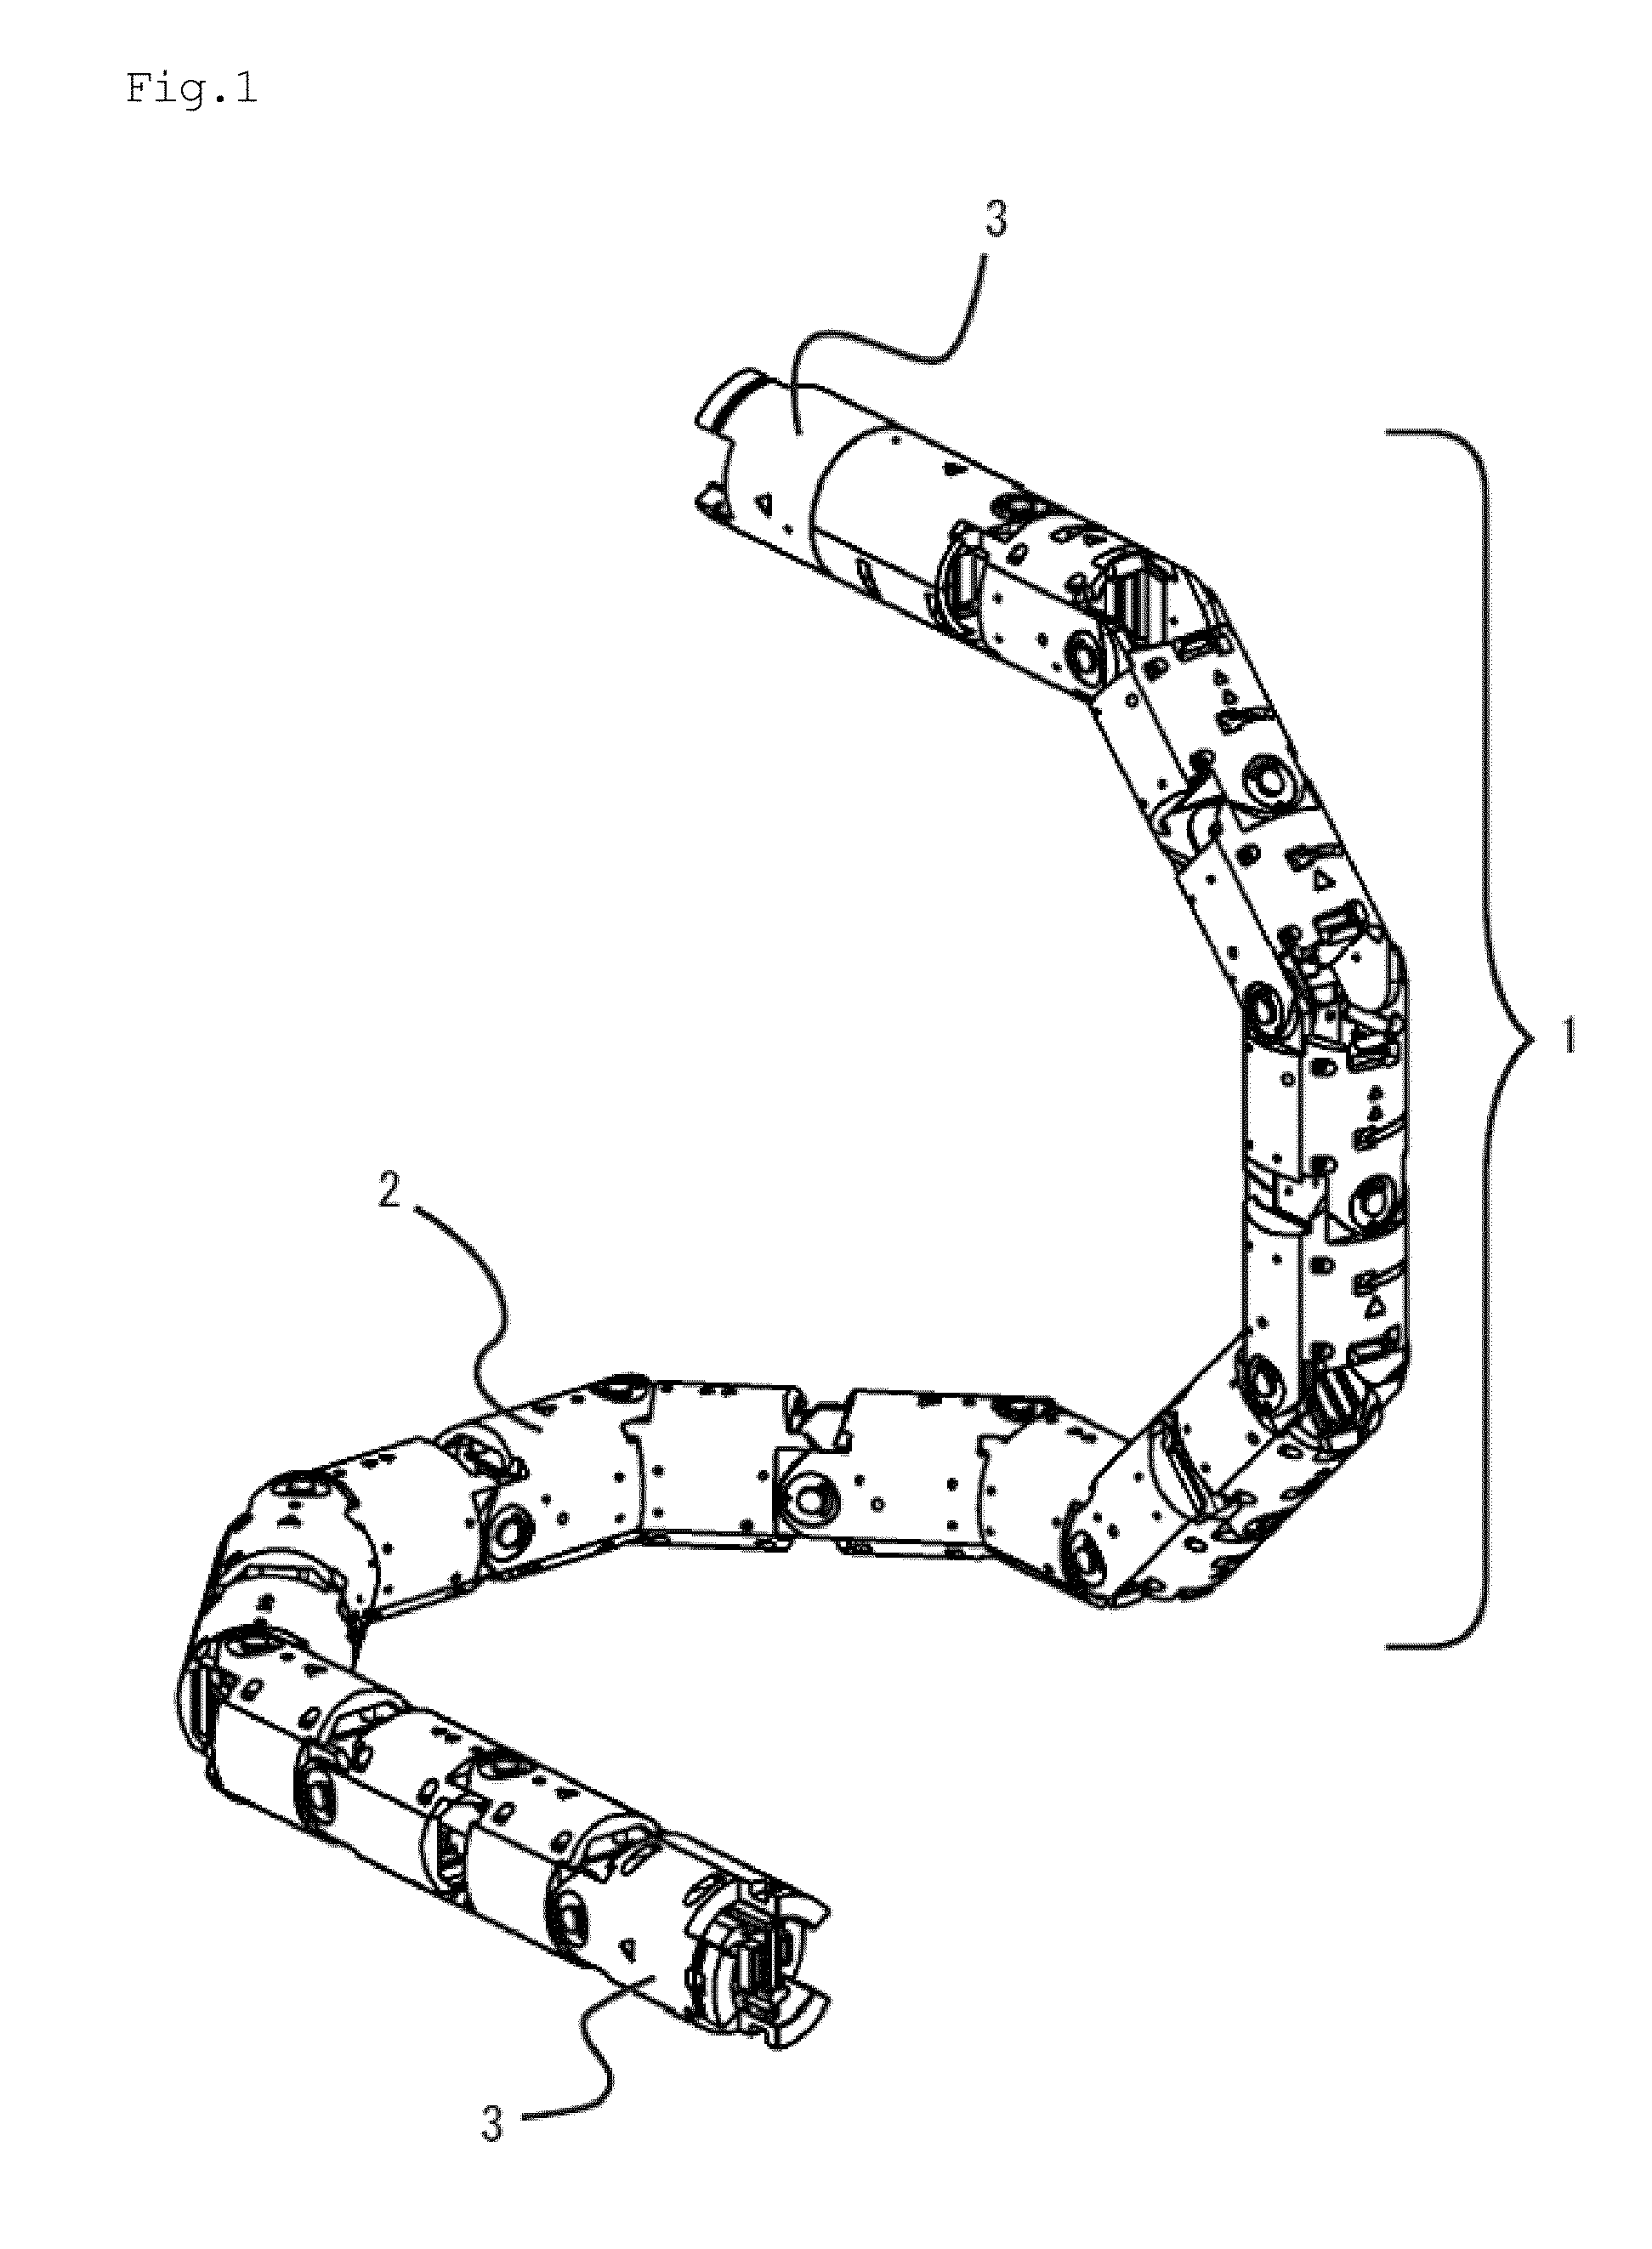 Multi-joint structure, mounting tool using it, system and human machine interface